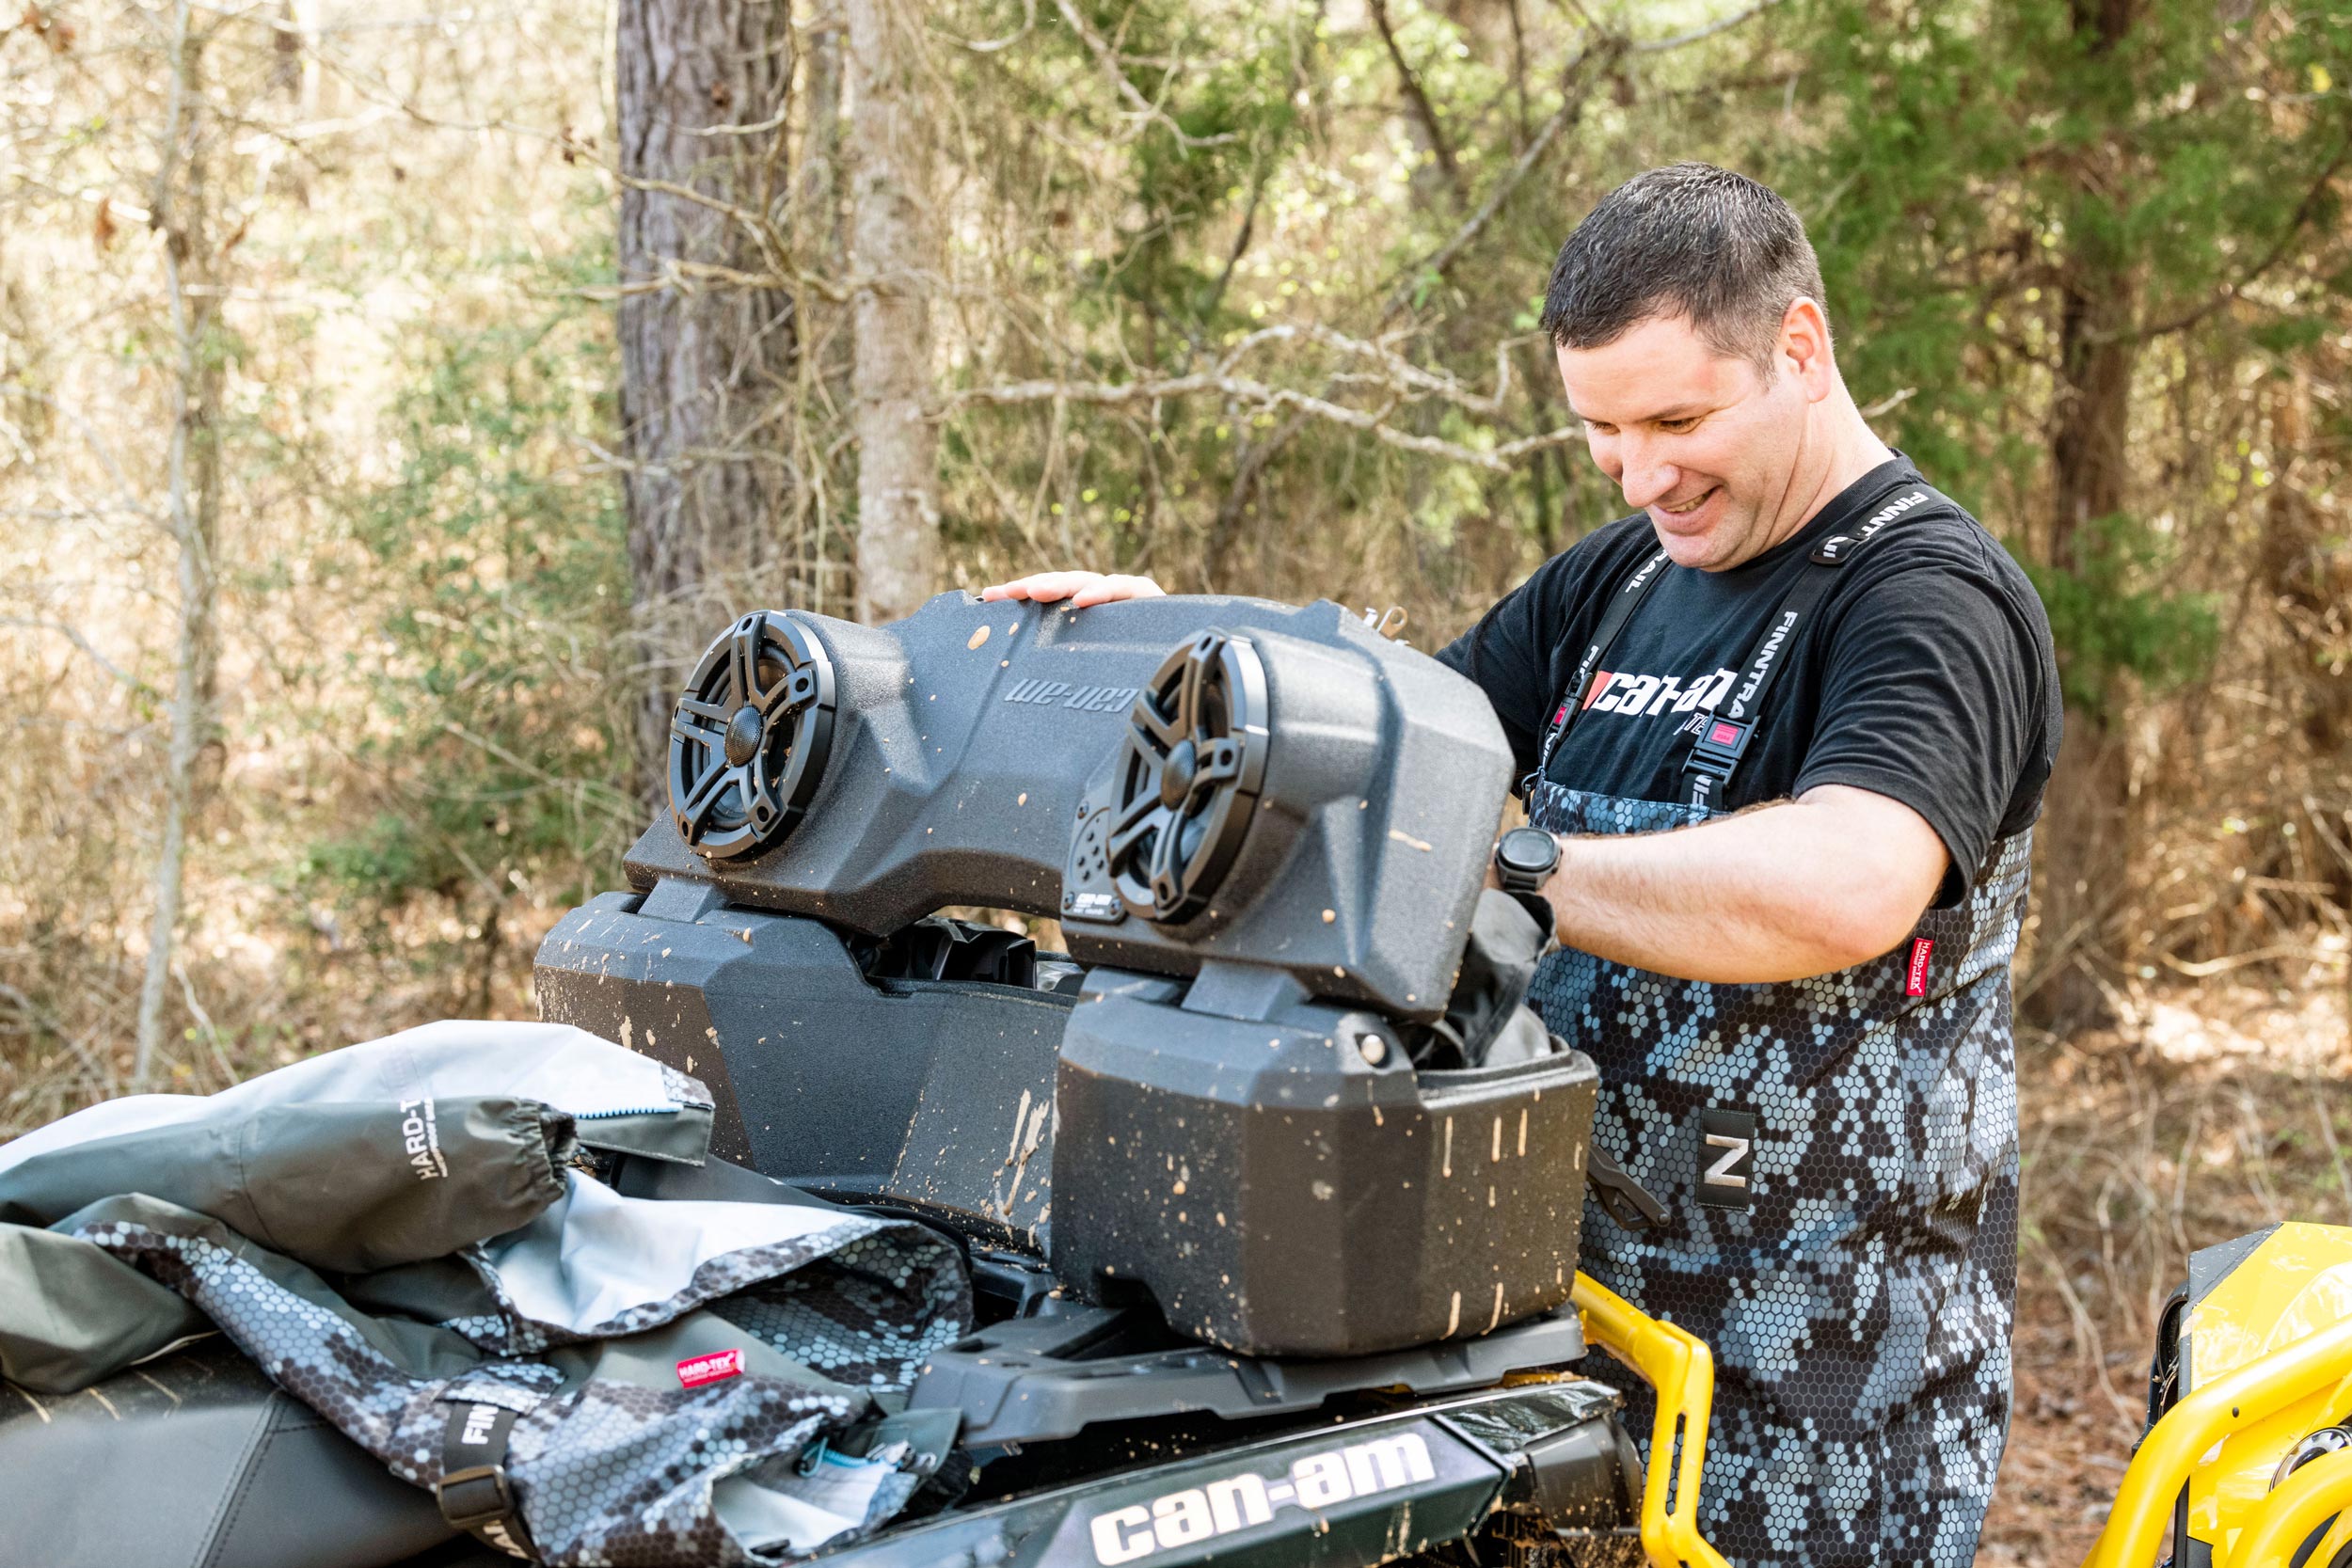 Man looking at a LinQ Audio Cargo Box on a Can-Am Off-Road ATV